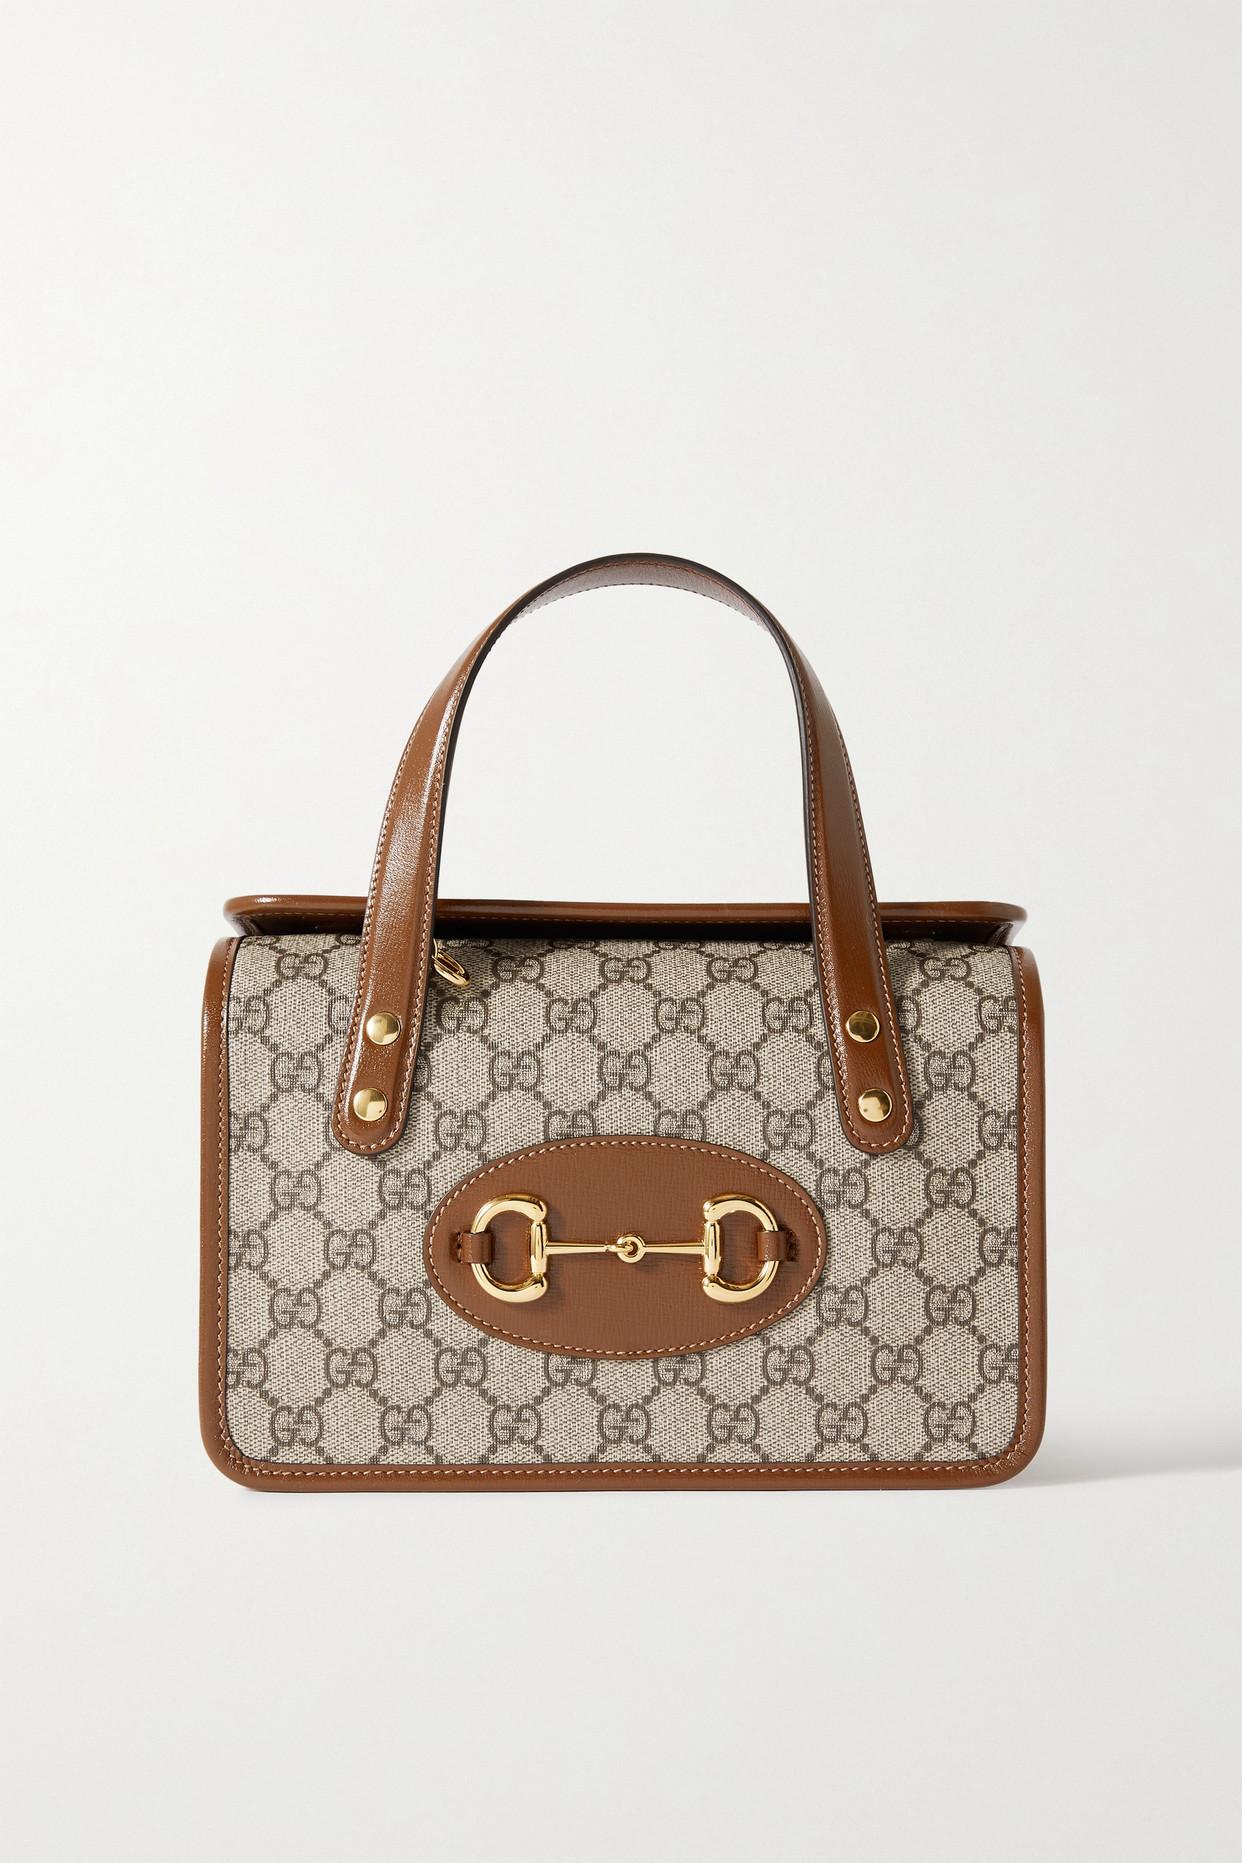 Gucci Horsebit 1955 Small Leather-trimmed Printed Coated-canvas Shoulder Bag - Brown - One Size